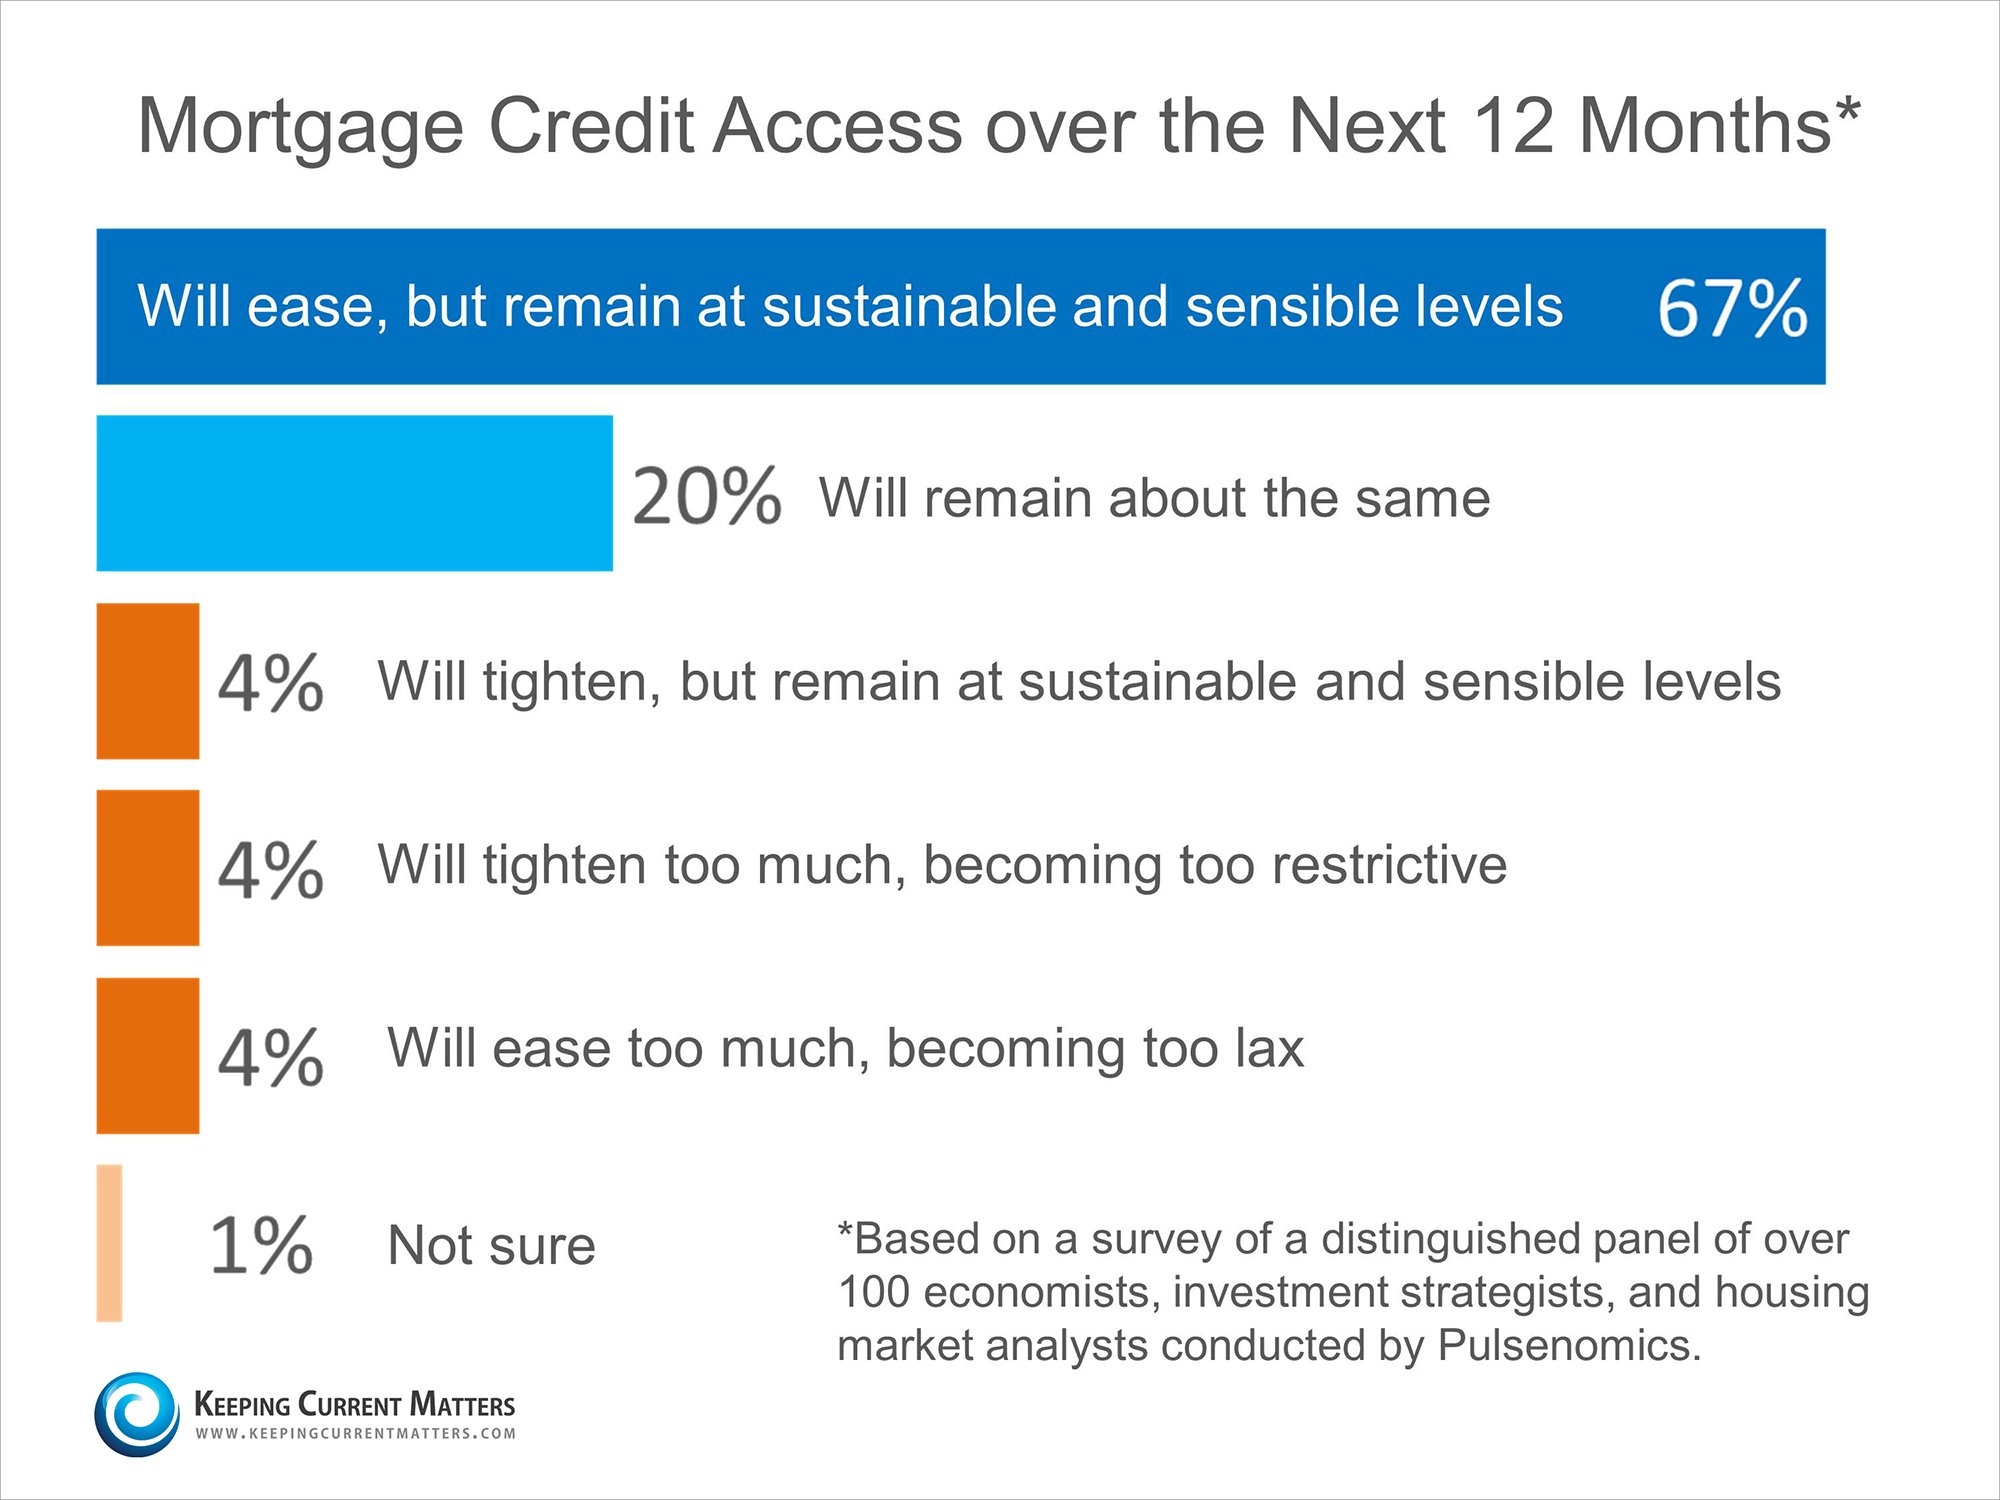 Mortgage Access Survey | Keeping Current Matters